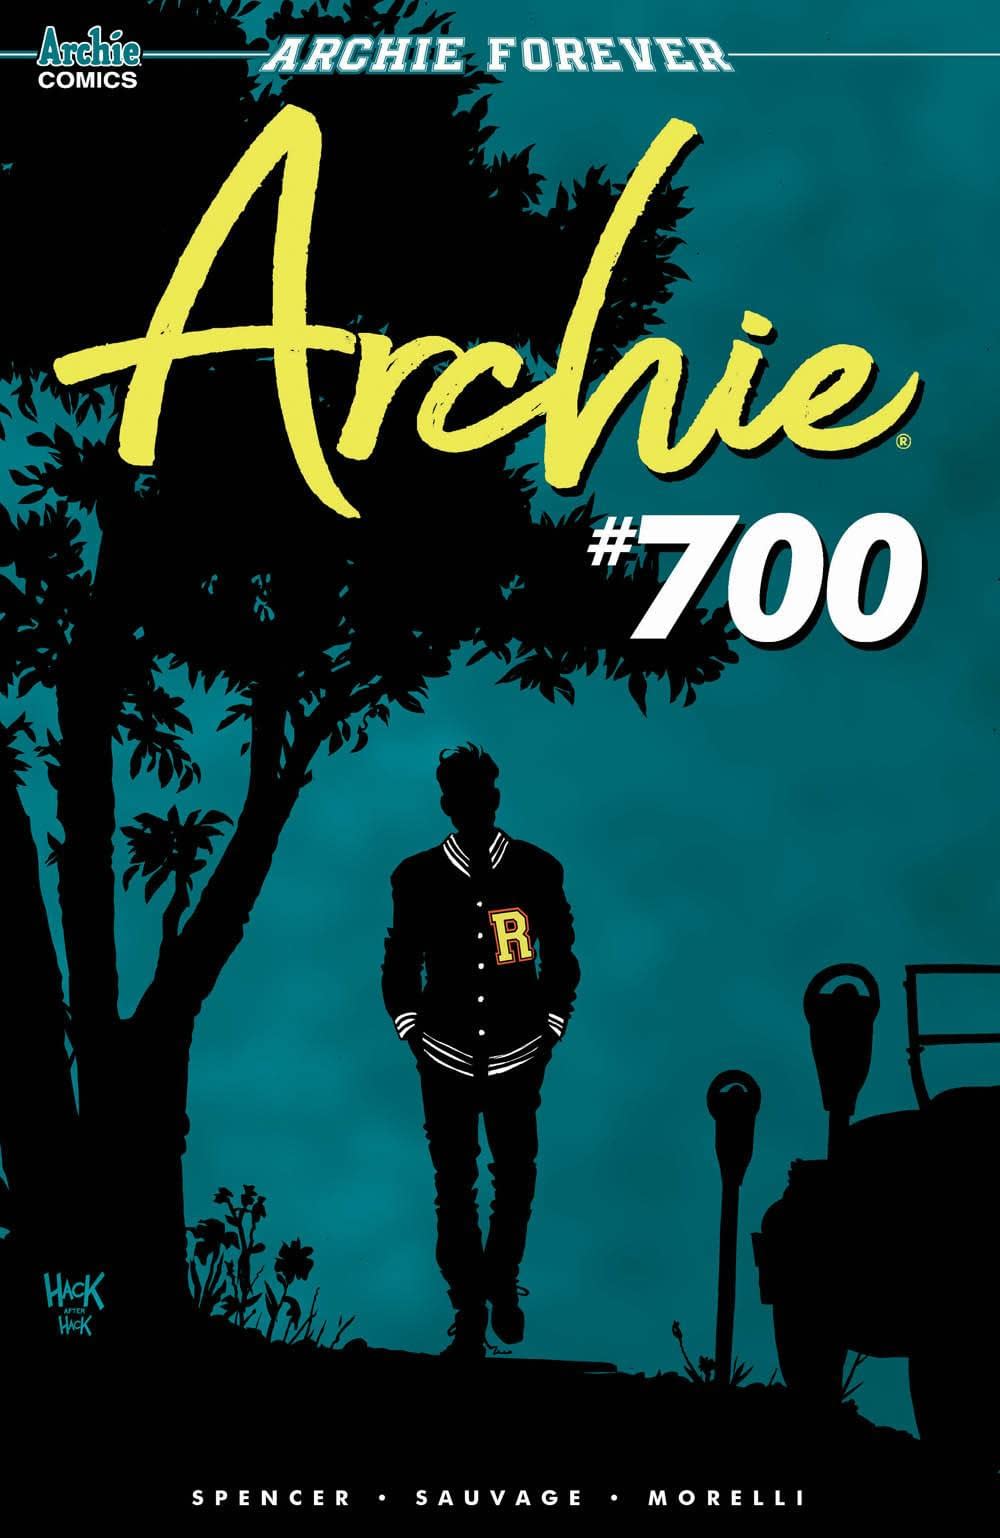 Archie #700 Preview Teases Secrets That Could "Change Everything" About Riverdale